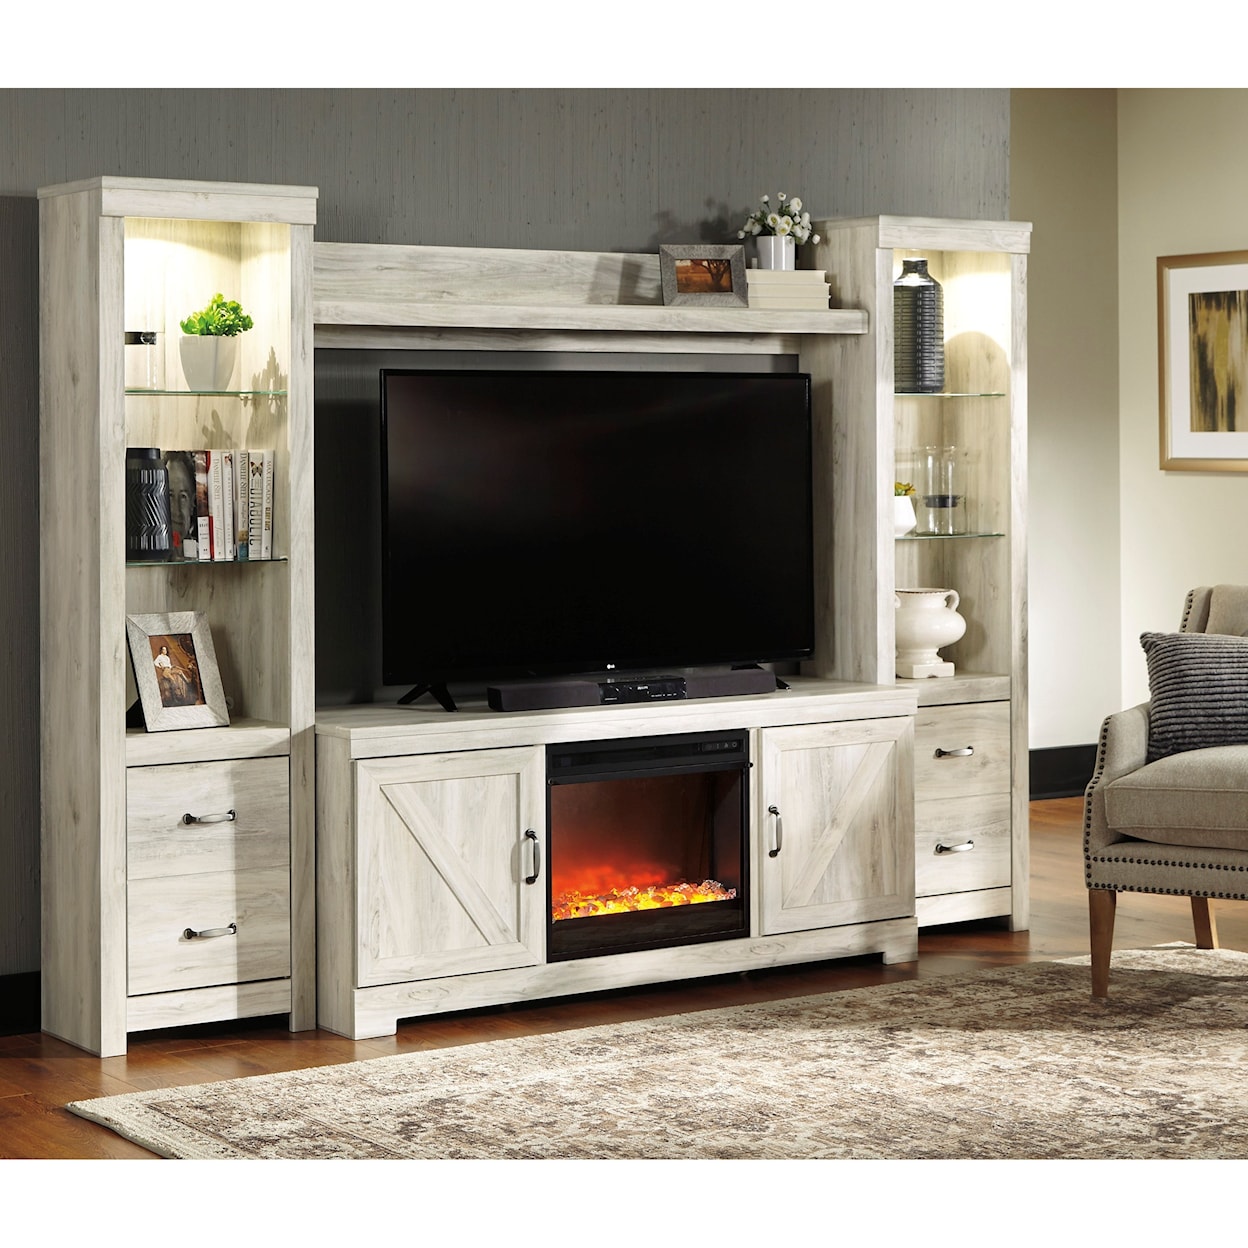 Benchcraft Bellaby Wall Unit with Fireplace